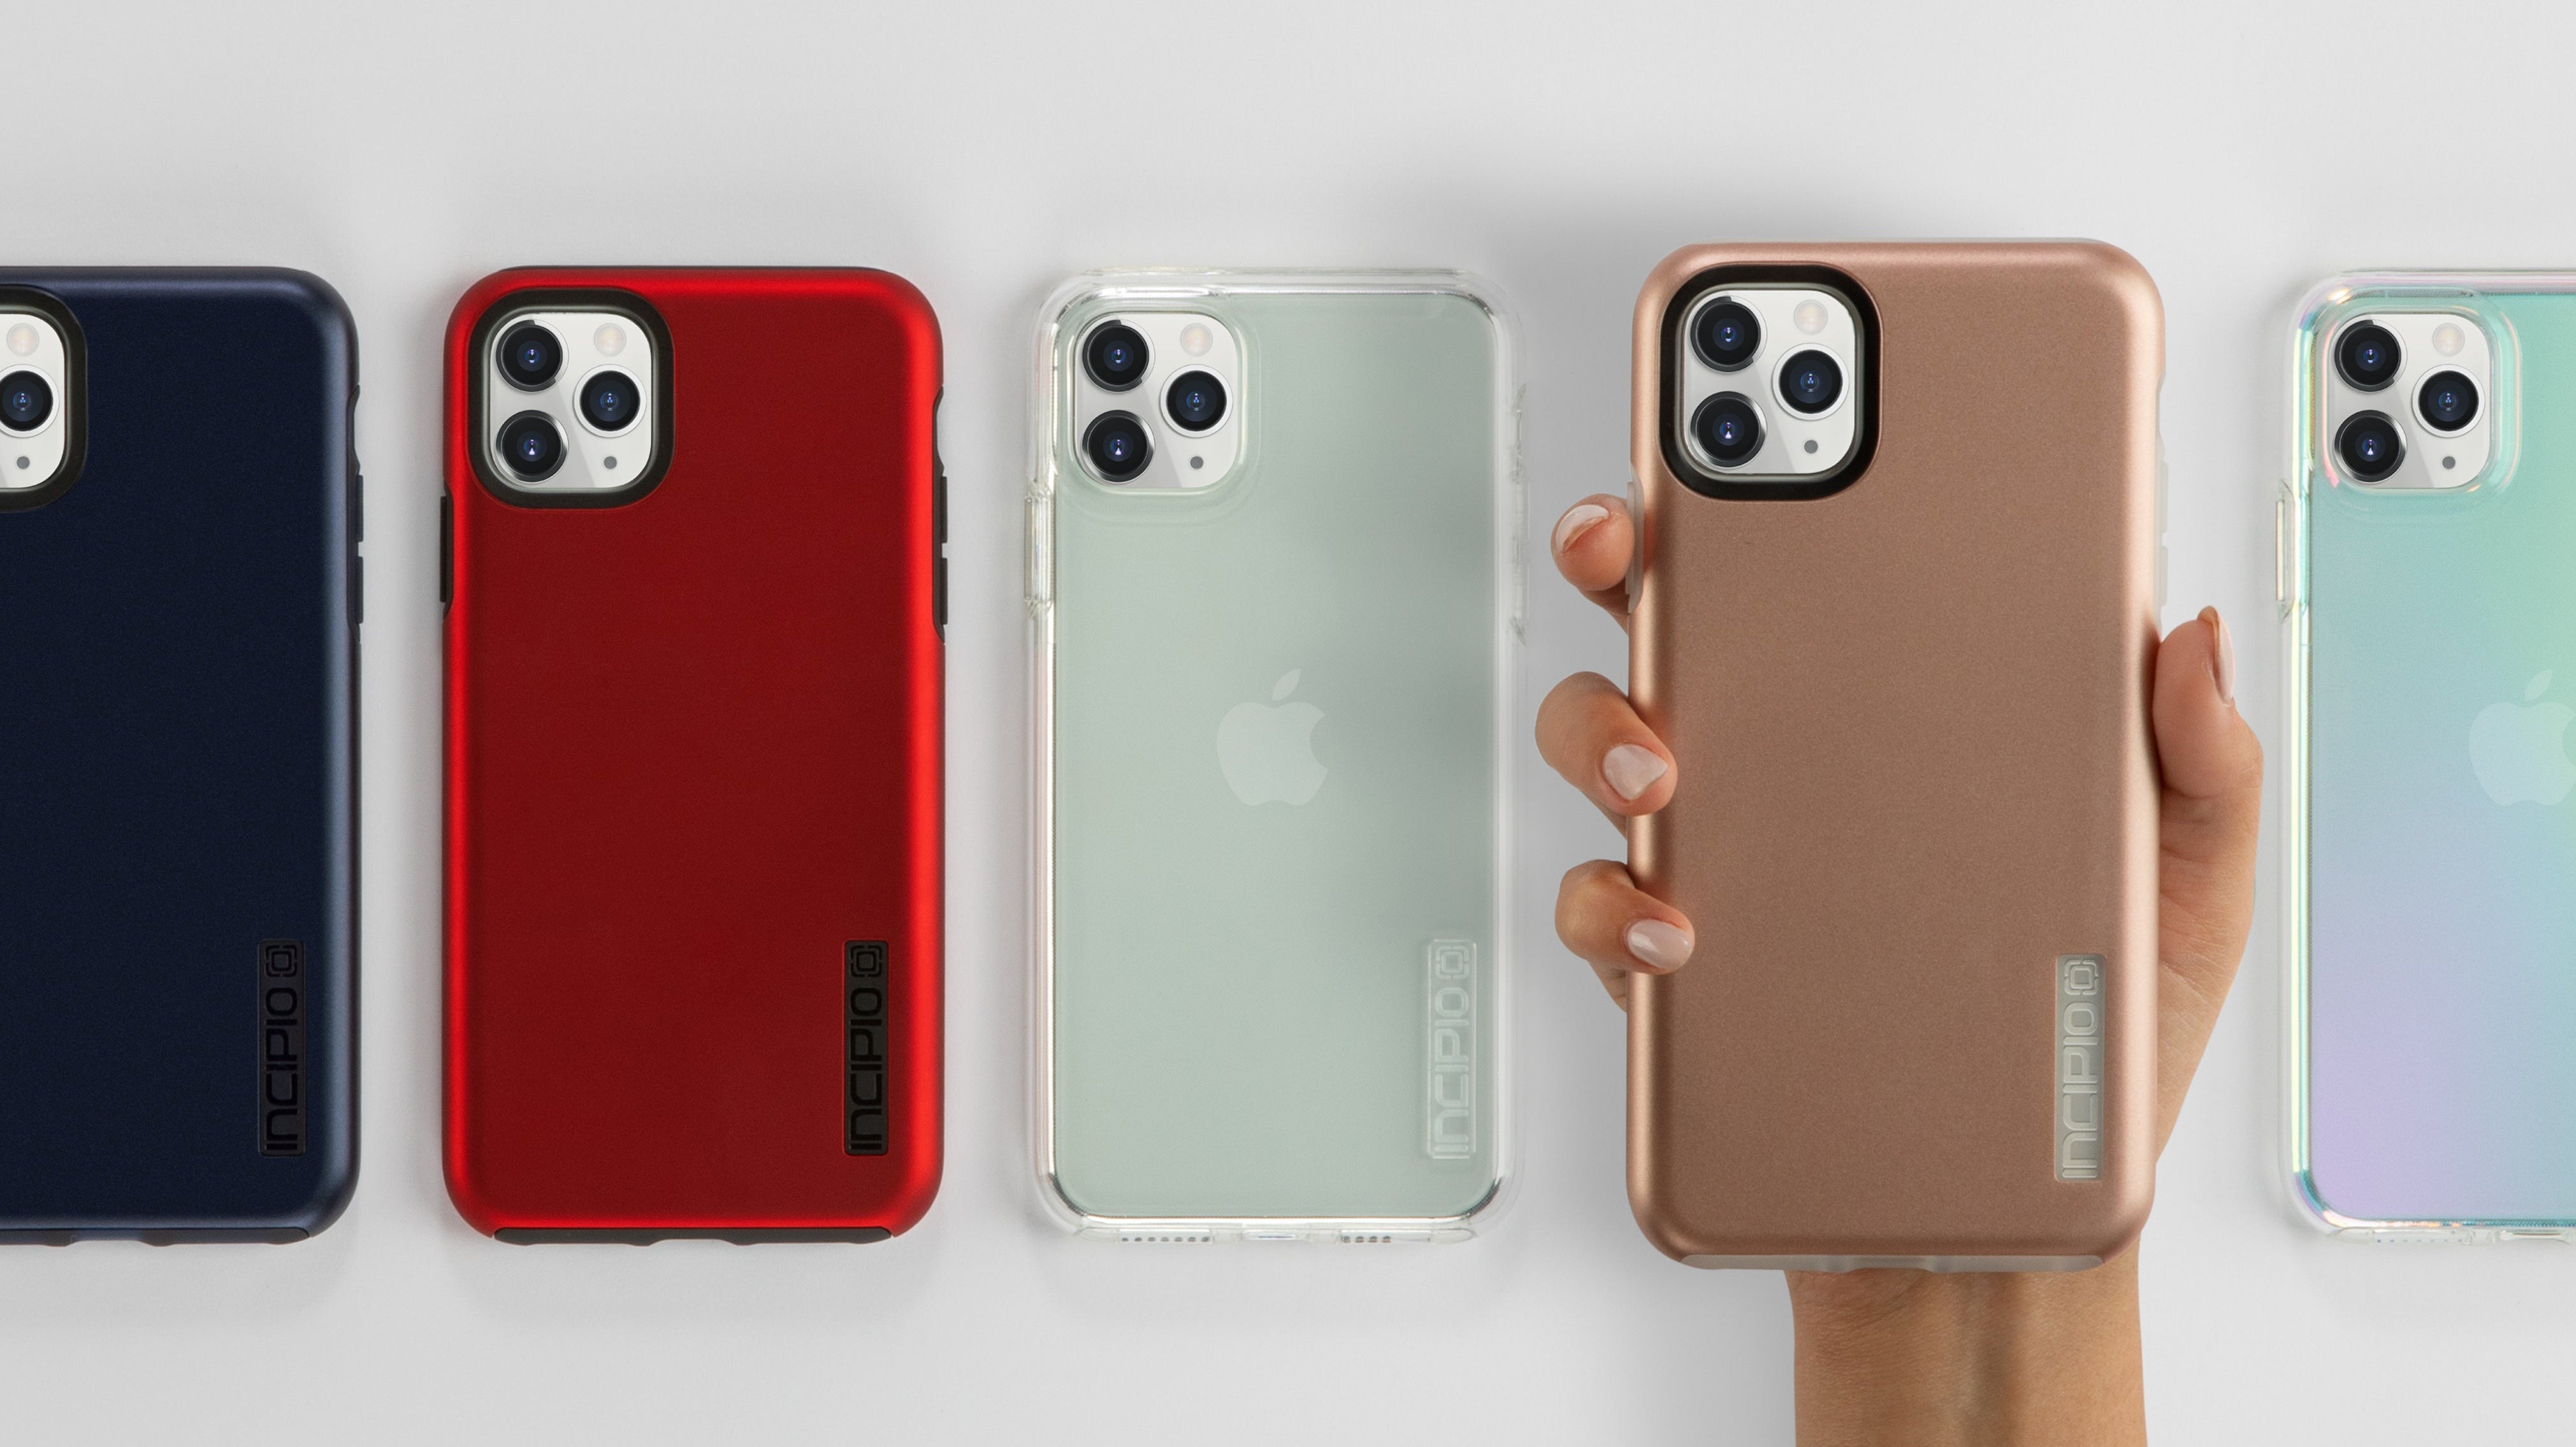 Incipio Launches Complete Range of Slim Protective Cases for iPhone 11, iPhone 11 Pro and iPhone 11 Pro Max